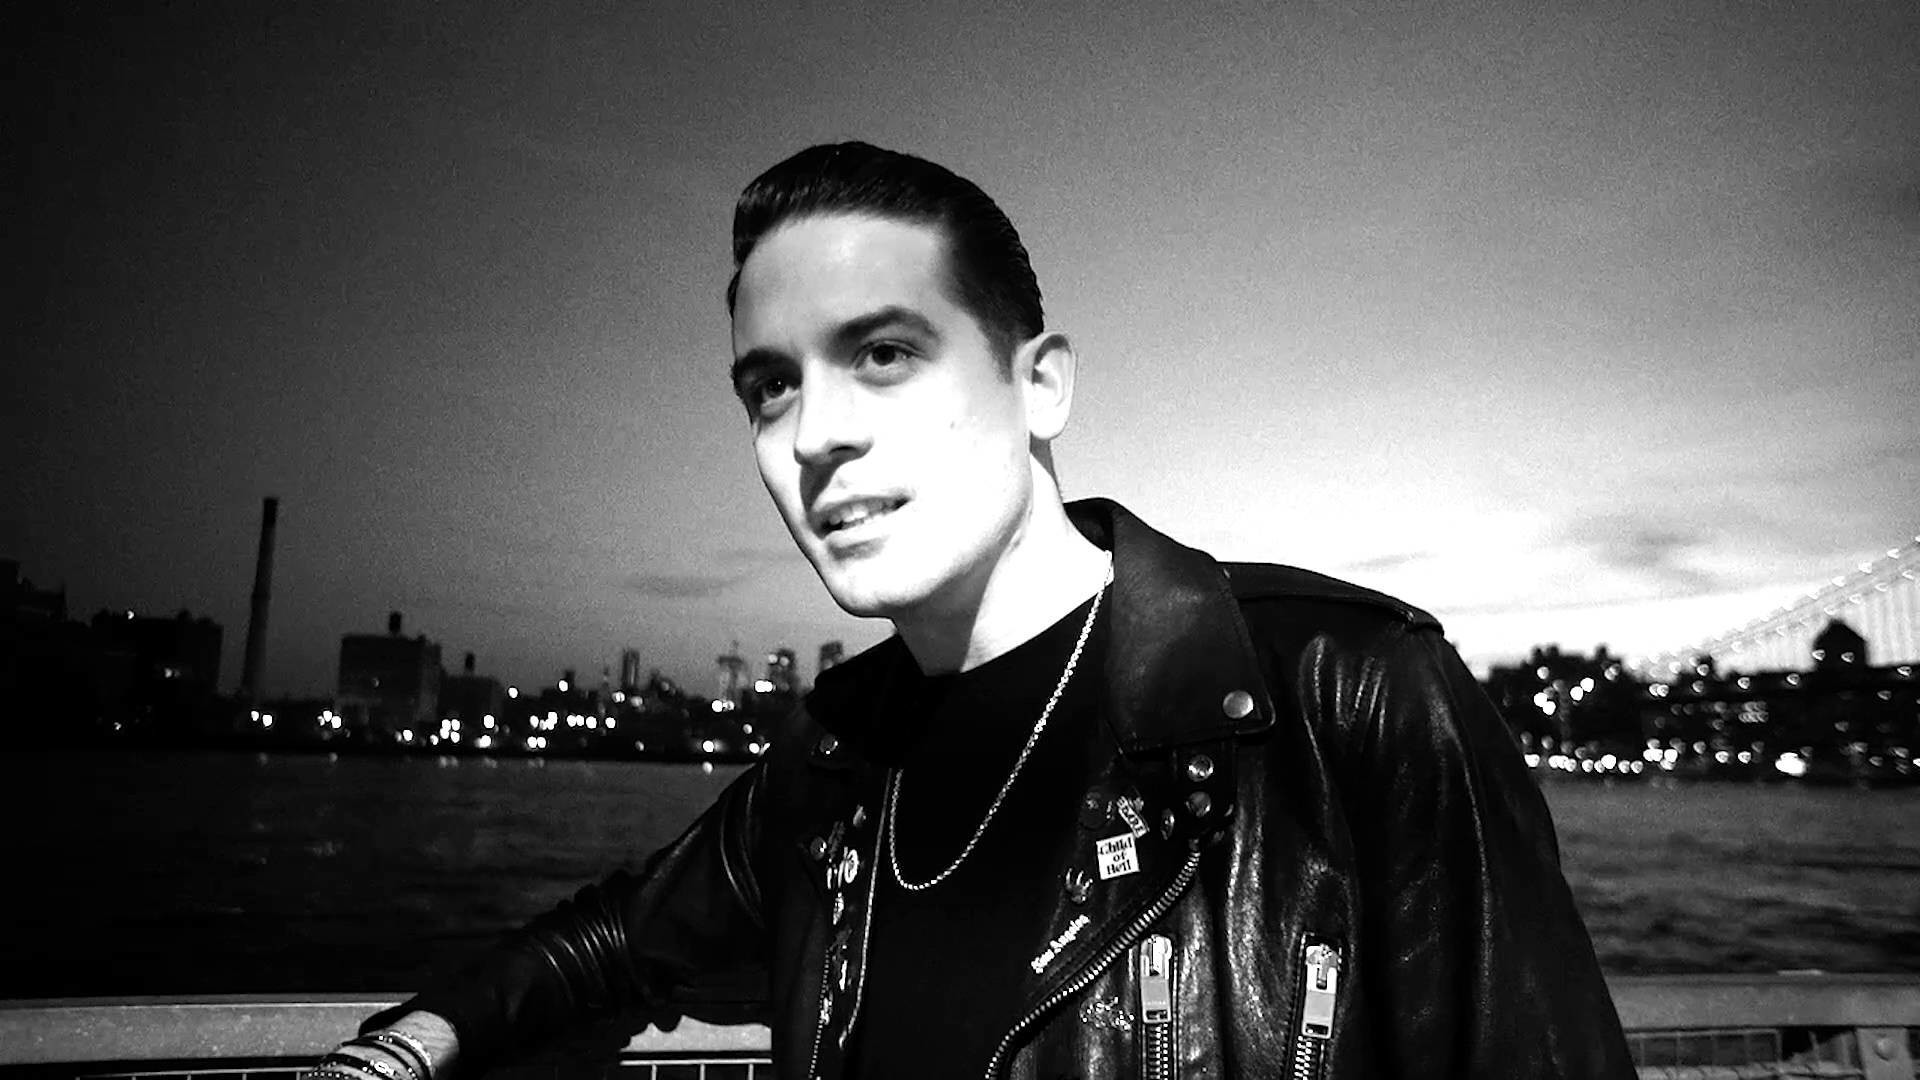 G-eazy Wallpapers Images Photos Pictures Backgrounds - G Eazy Computer Background - HD Wallpaper 